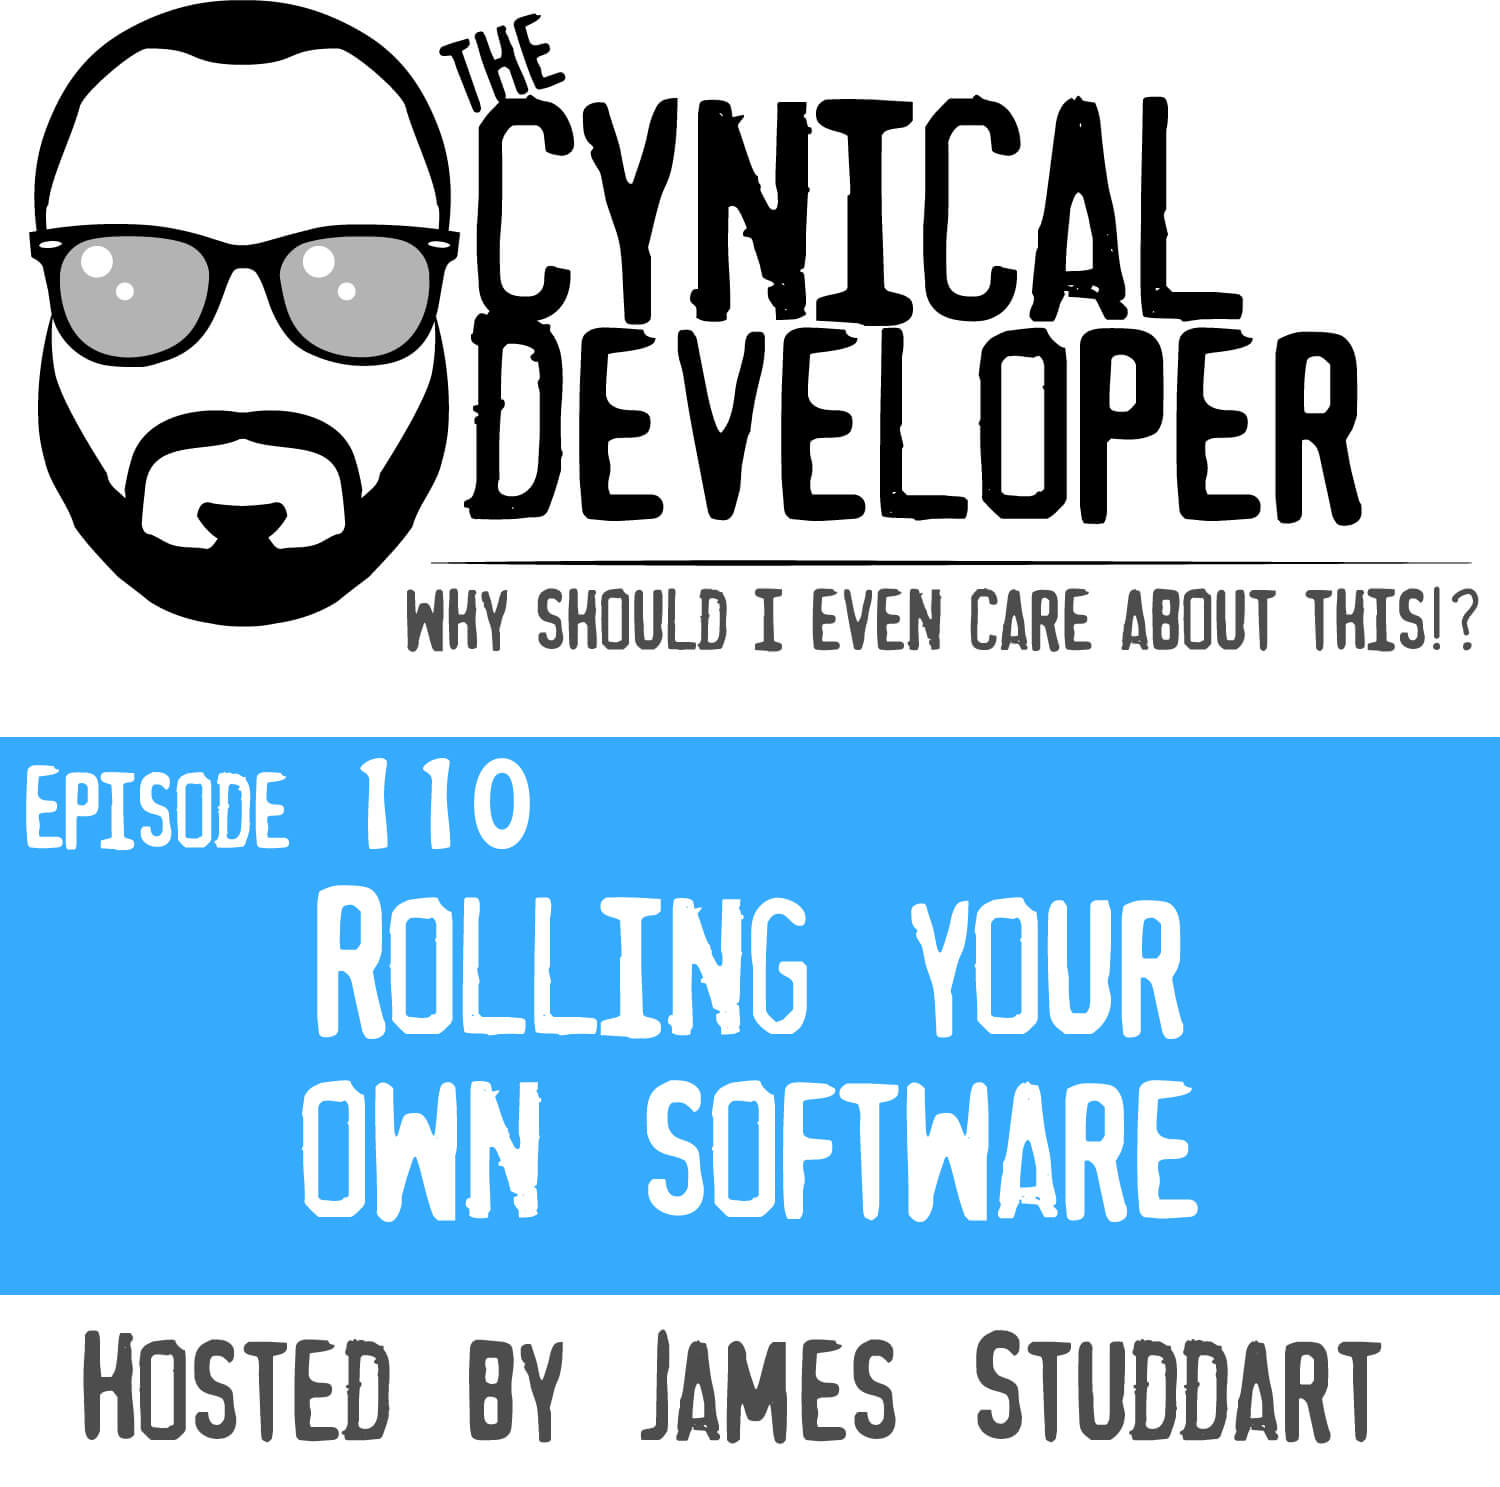 Episode 110 - Rolling your own software